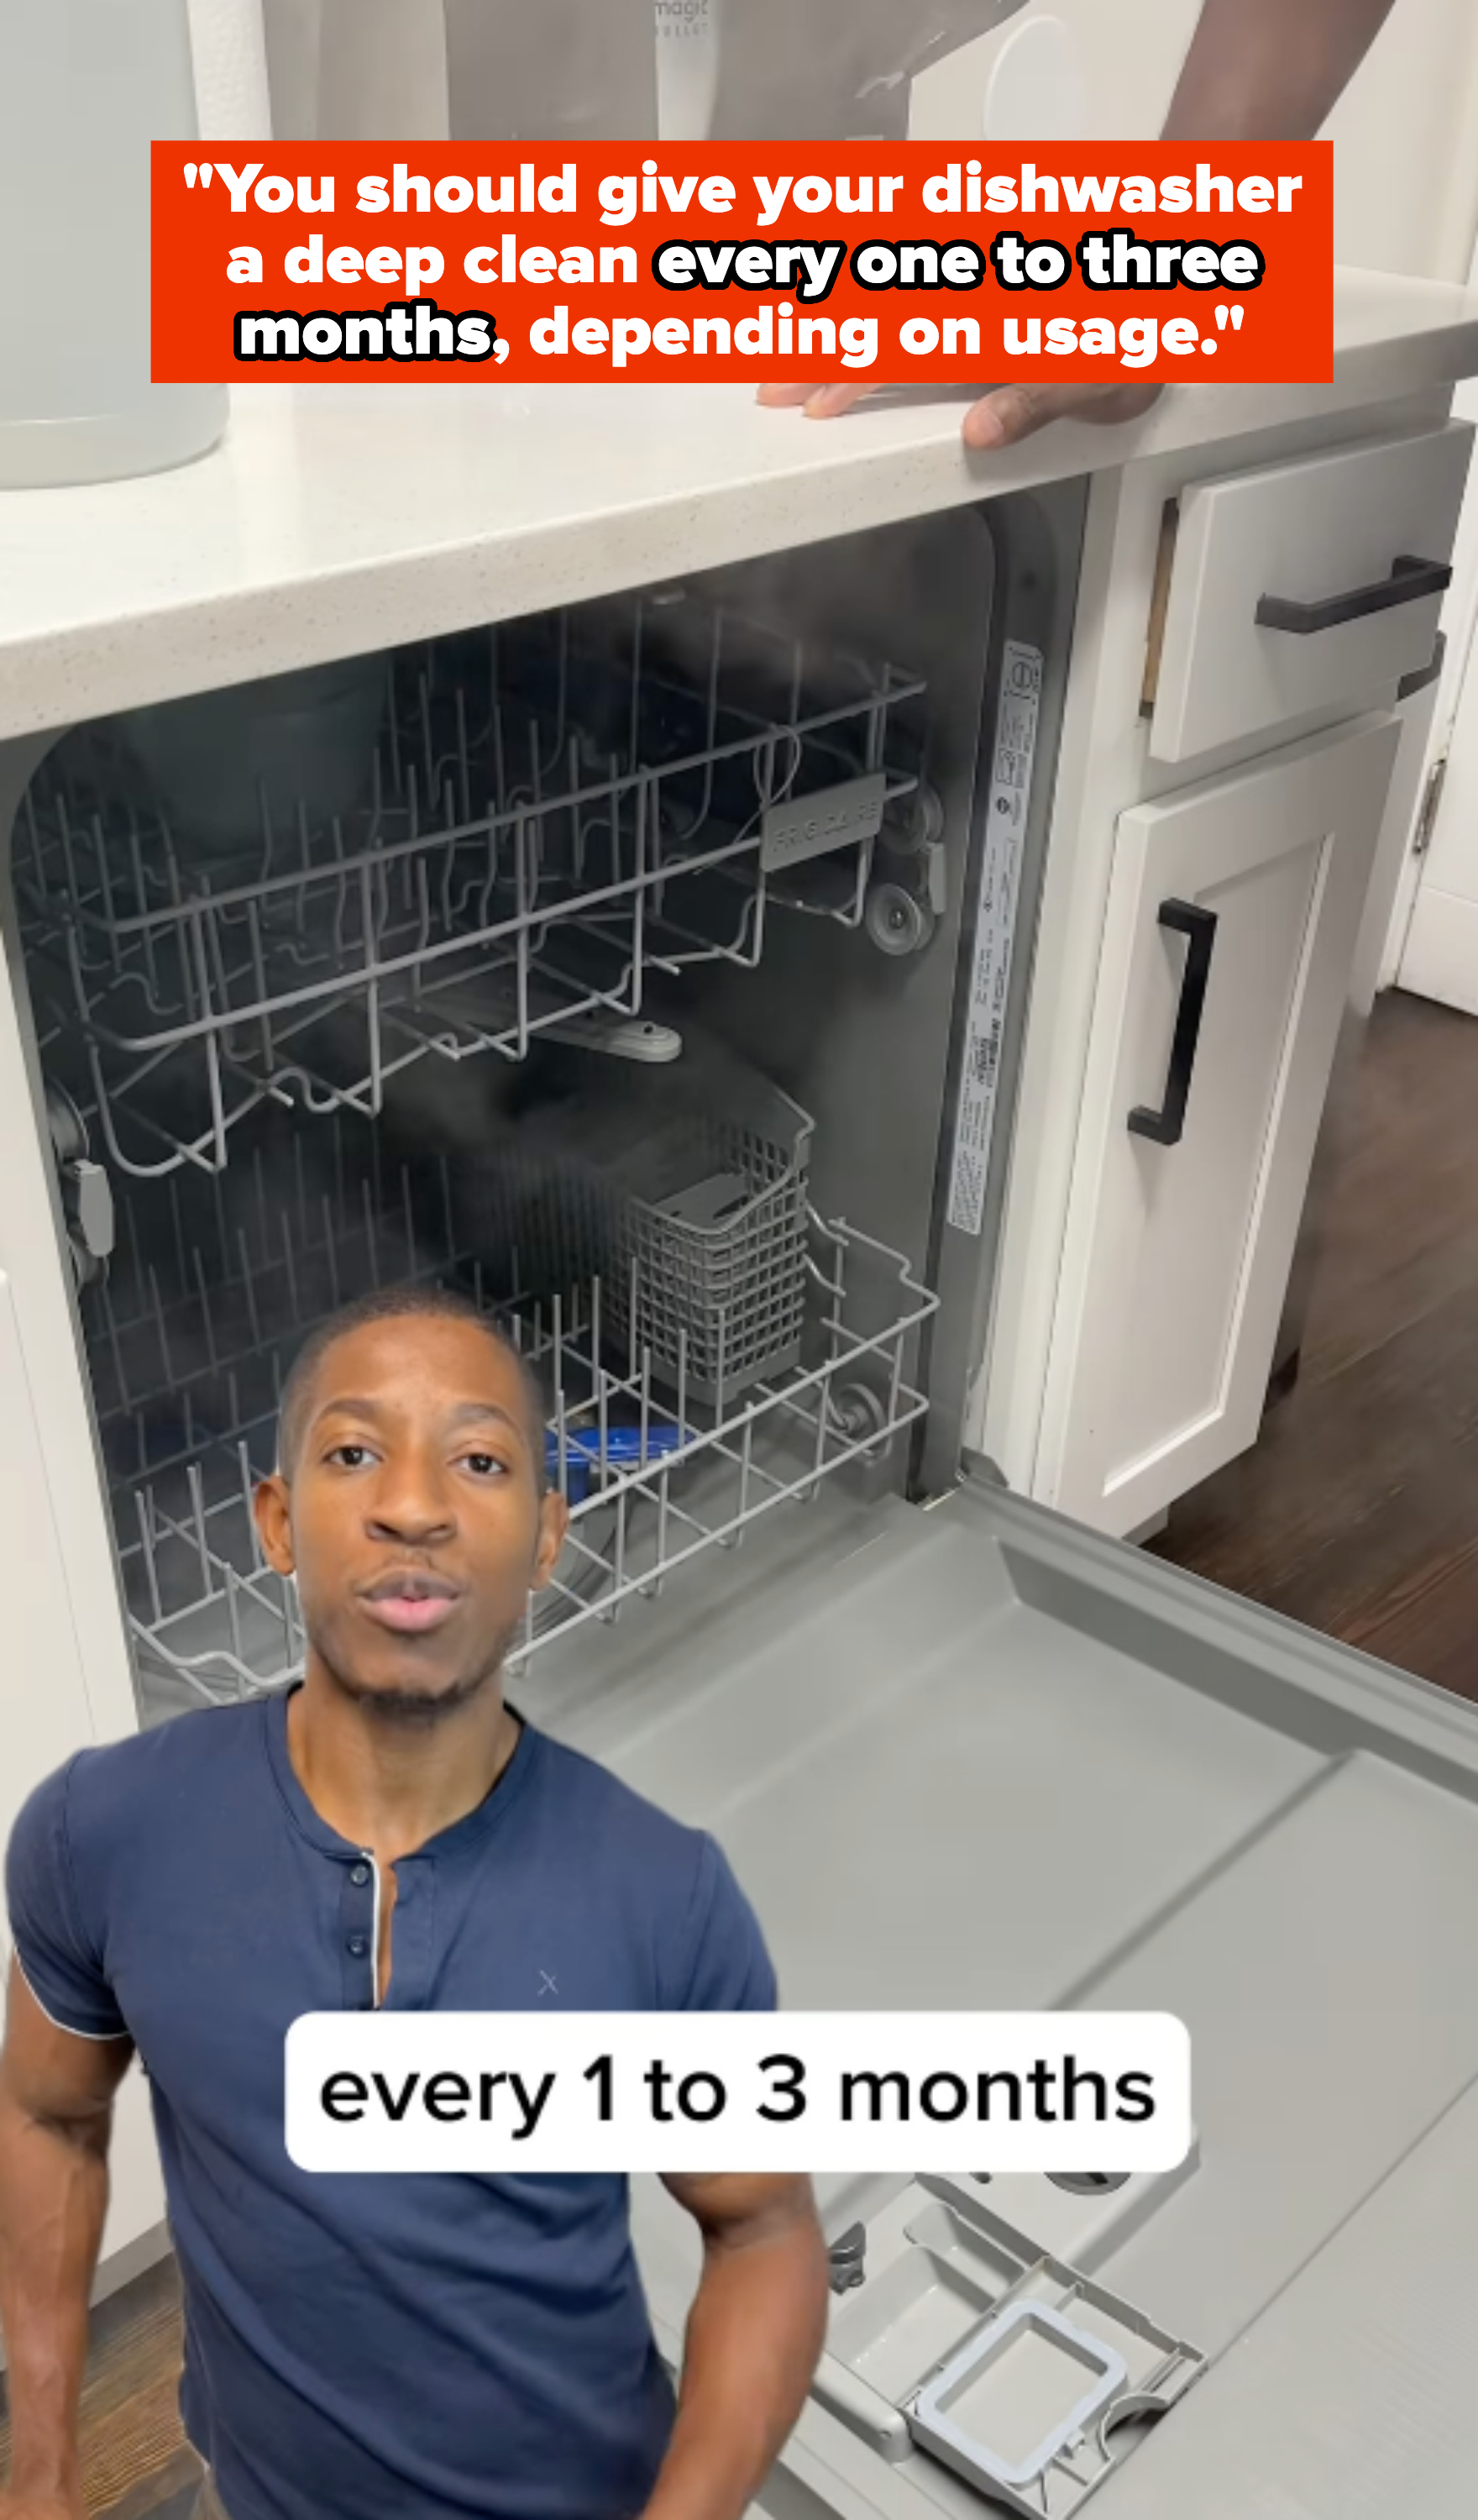 Kyshawn in kitchen standing near open dishwasher, text overlay: &quot;You should give your dishwasher a deep clean every one to three months, depending on usage&quot;